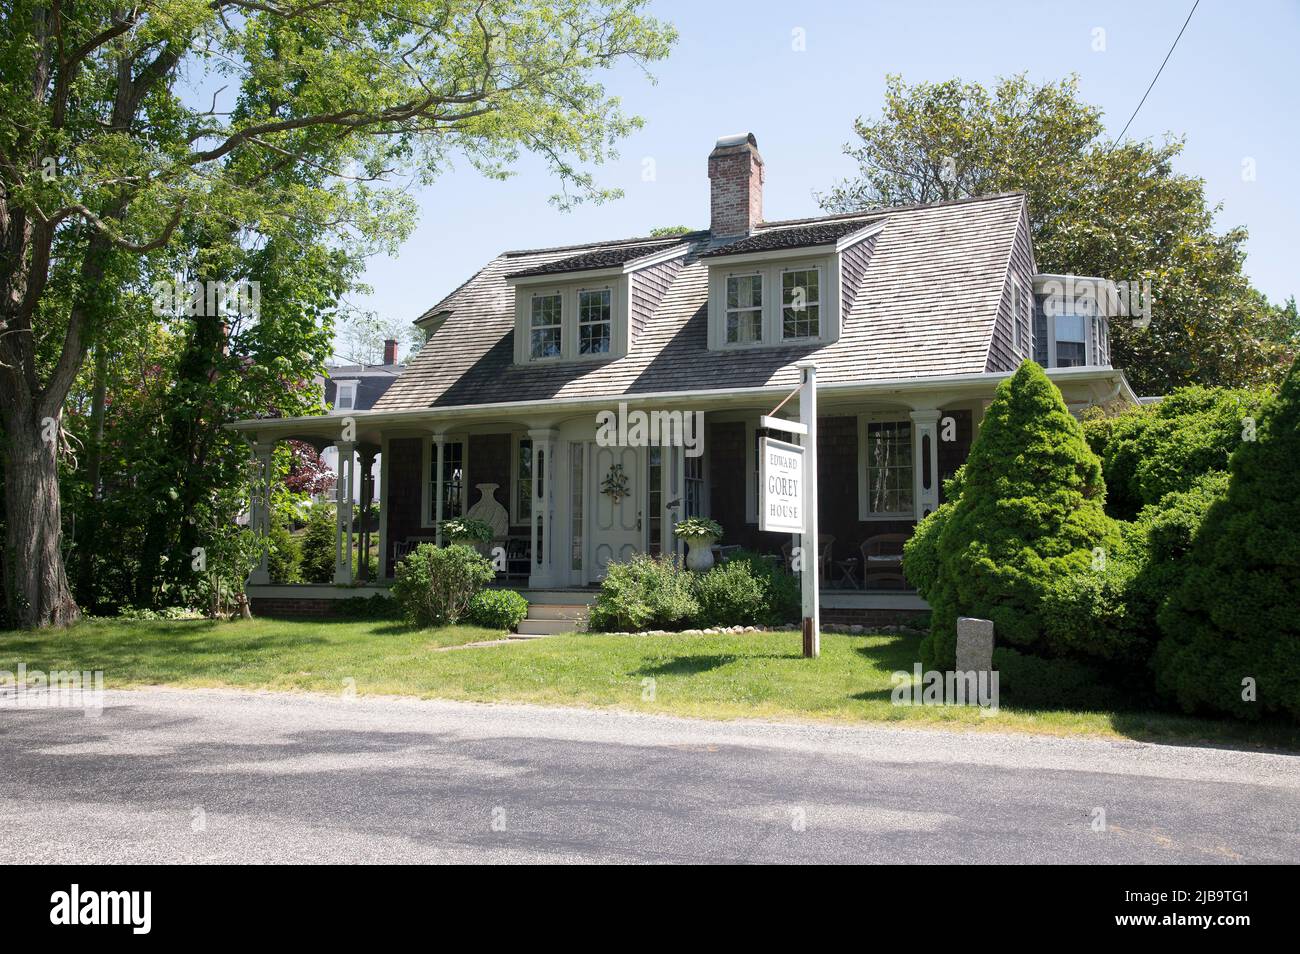 The Edward Gorey House in Yarmouth Port, Massachusetts, on Cape Cod, USA. The Edward Gorey House celebrates and preserves his life and works. Stock Photo